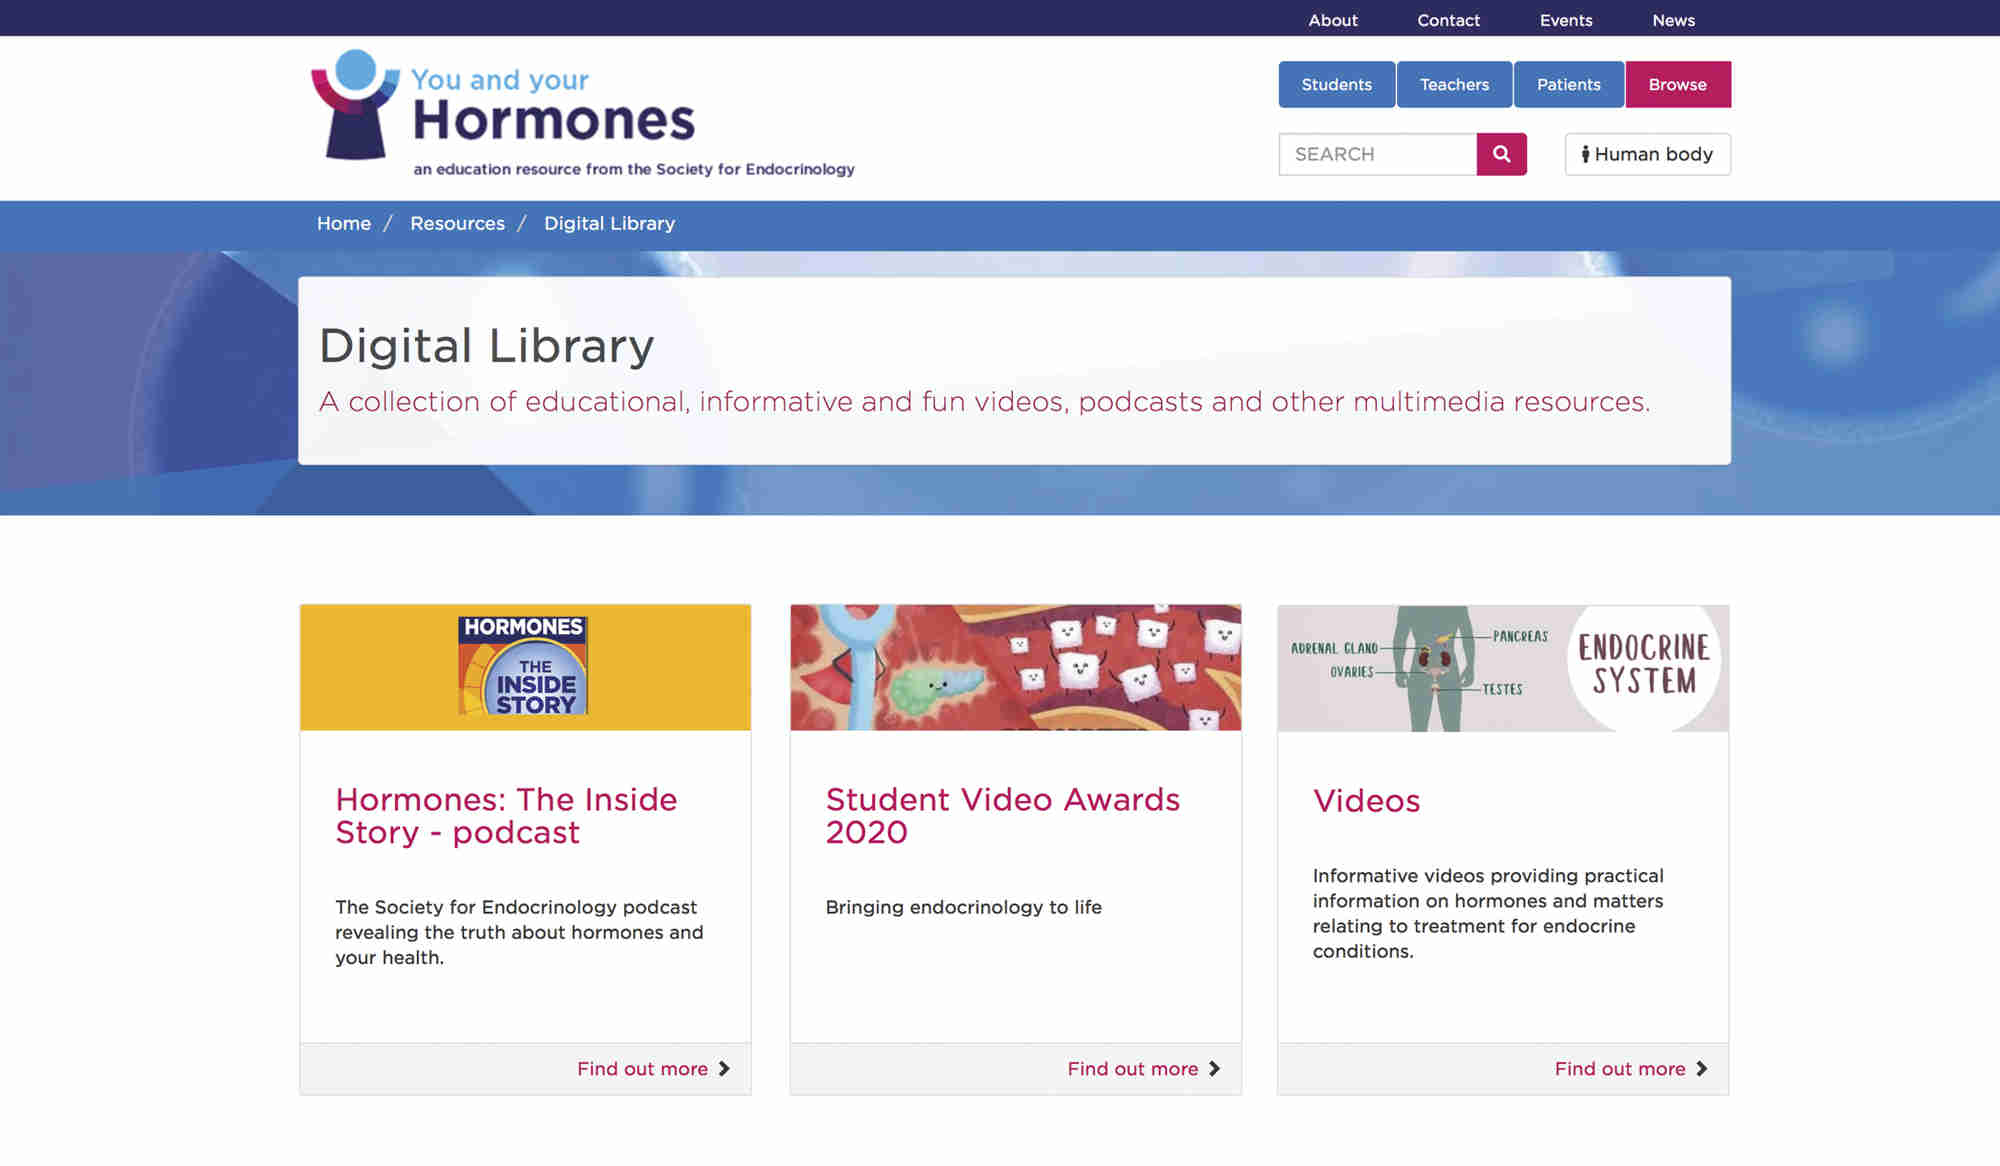 Digital library. Our new image-led collection of multimedia resources provides easy access to episodes and transcripts from our podcast series ‘Hormones: The Inside Story’. The excellent 2020 Student Video Award winners and our own ‘What is endocrinology?’ videos are now easy to find and the collections are ready to be expanded.